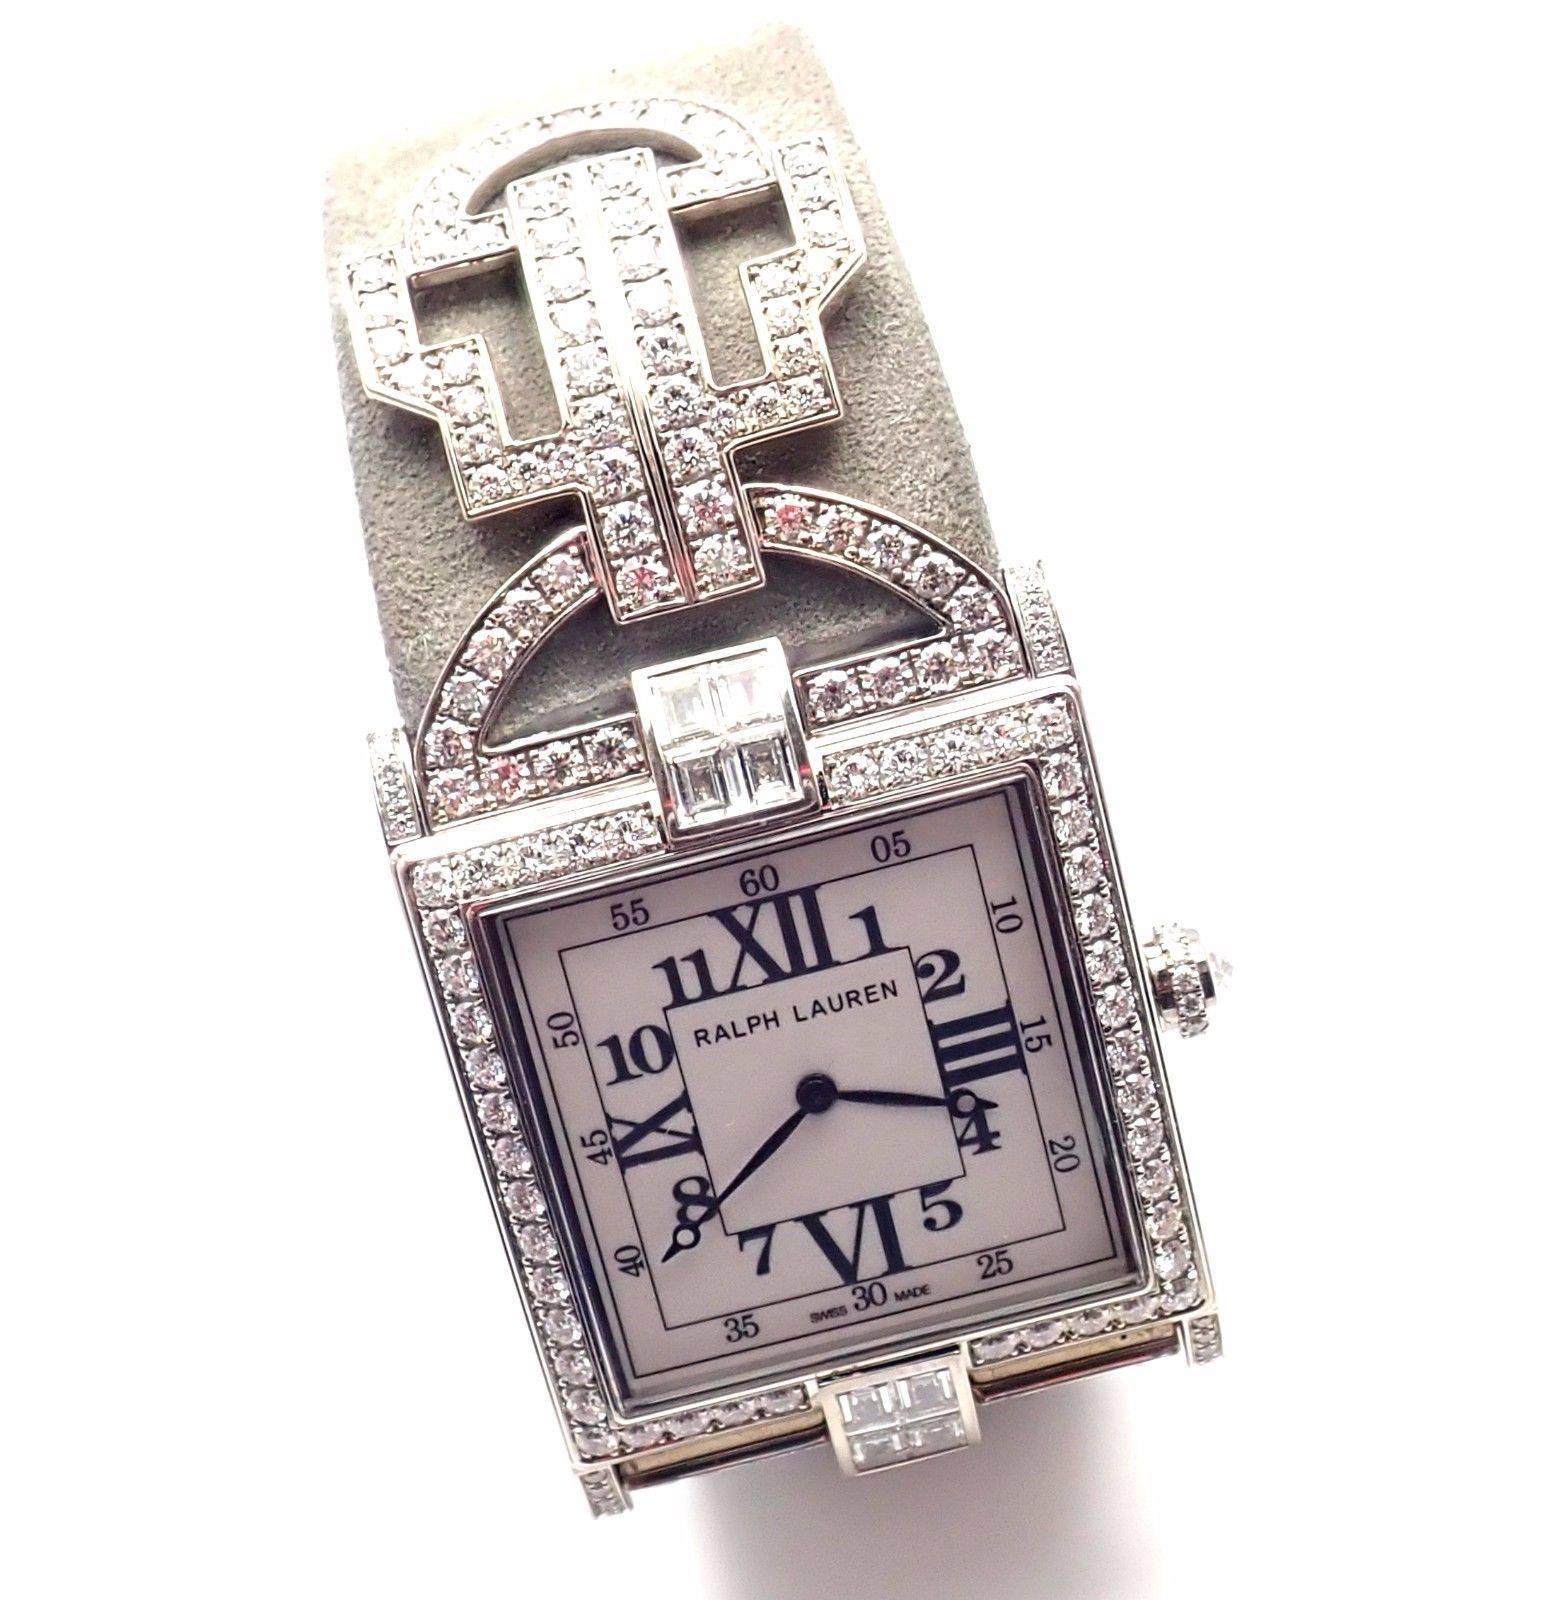 18k White Gold Diamond 867 Small Ladies Wristwatch by Ralph Lauren. 
With 314 round brilliant cut diamonds VVS1 clarity, E color total weight approx. 7.48ct
Brand: Ralph Lauren
Style Number: 867
Series: Small
Case Materials: 18k white gold with